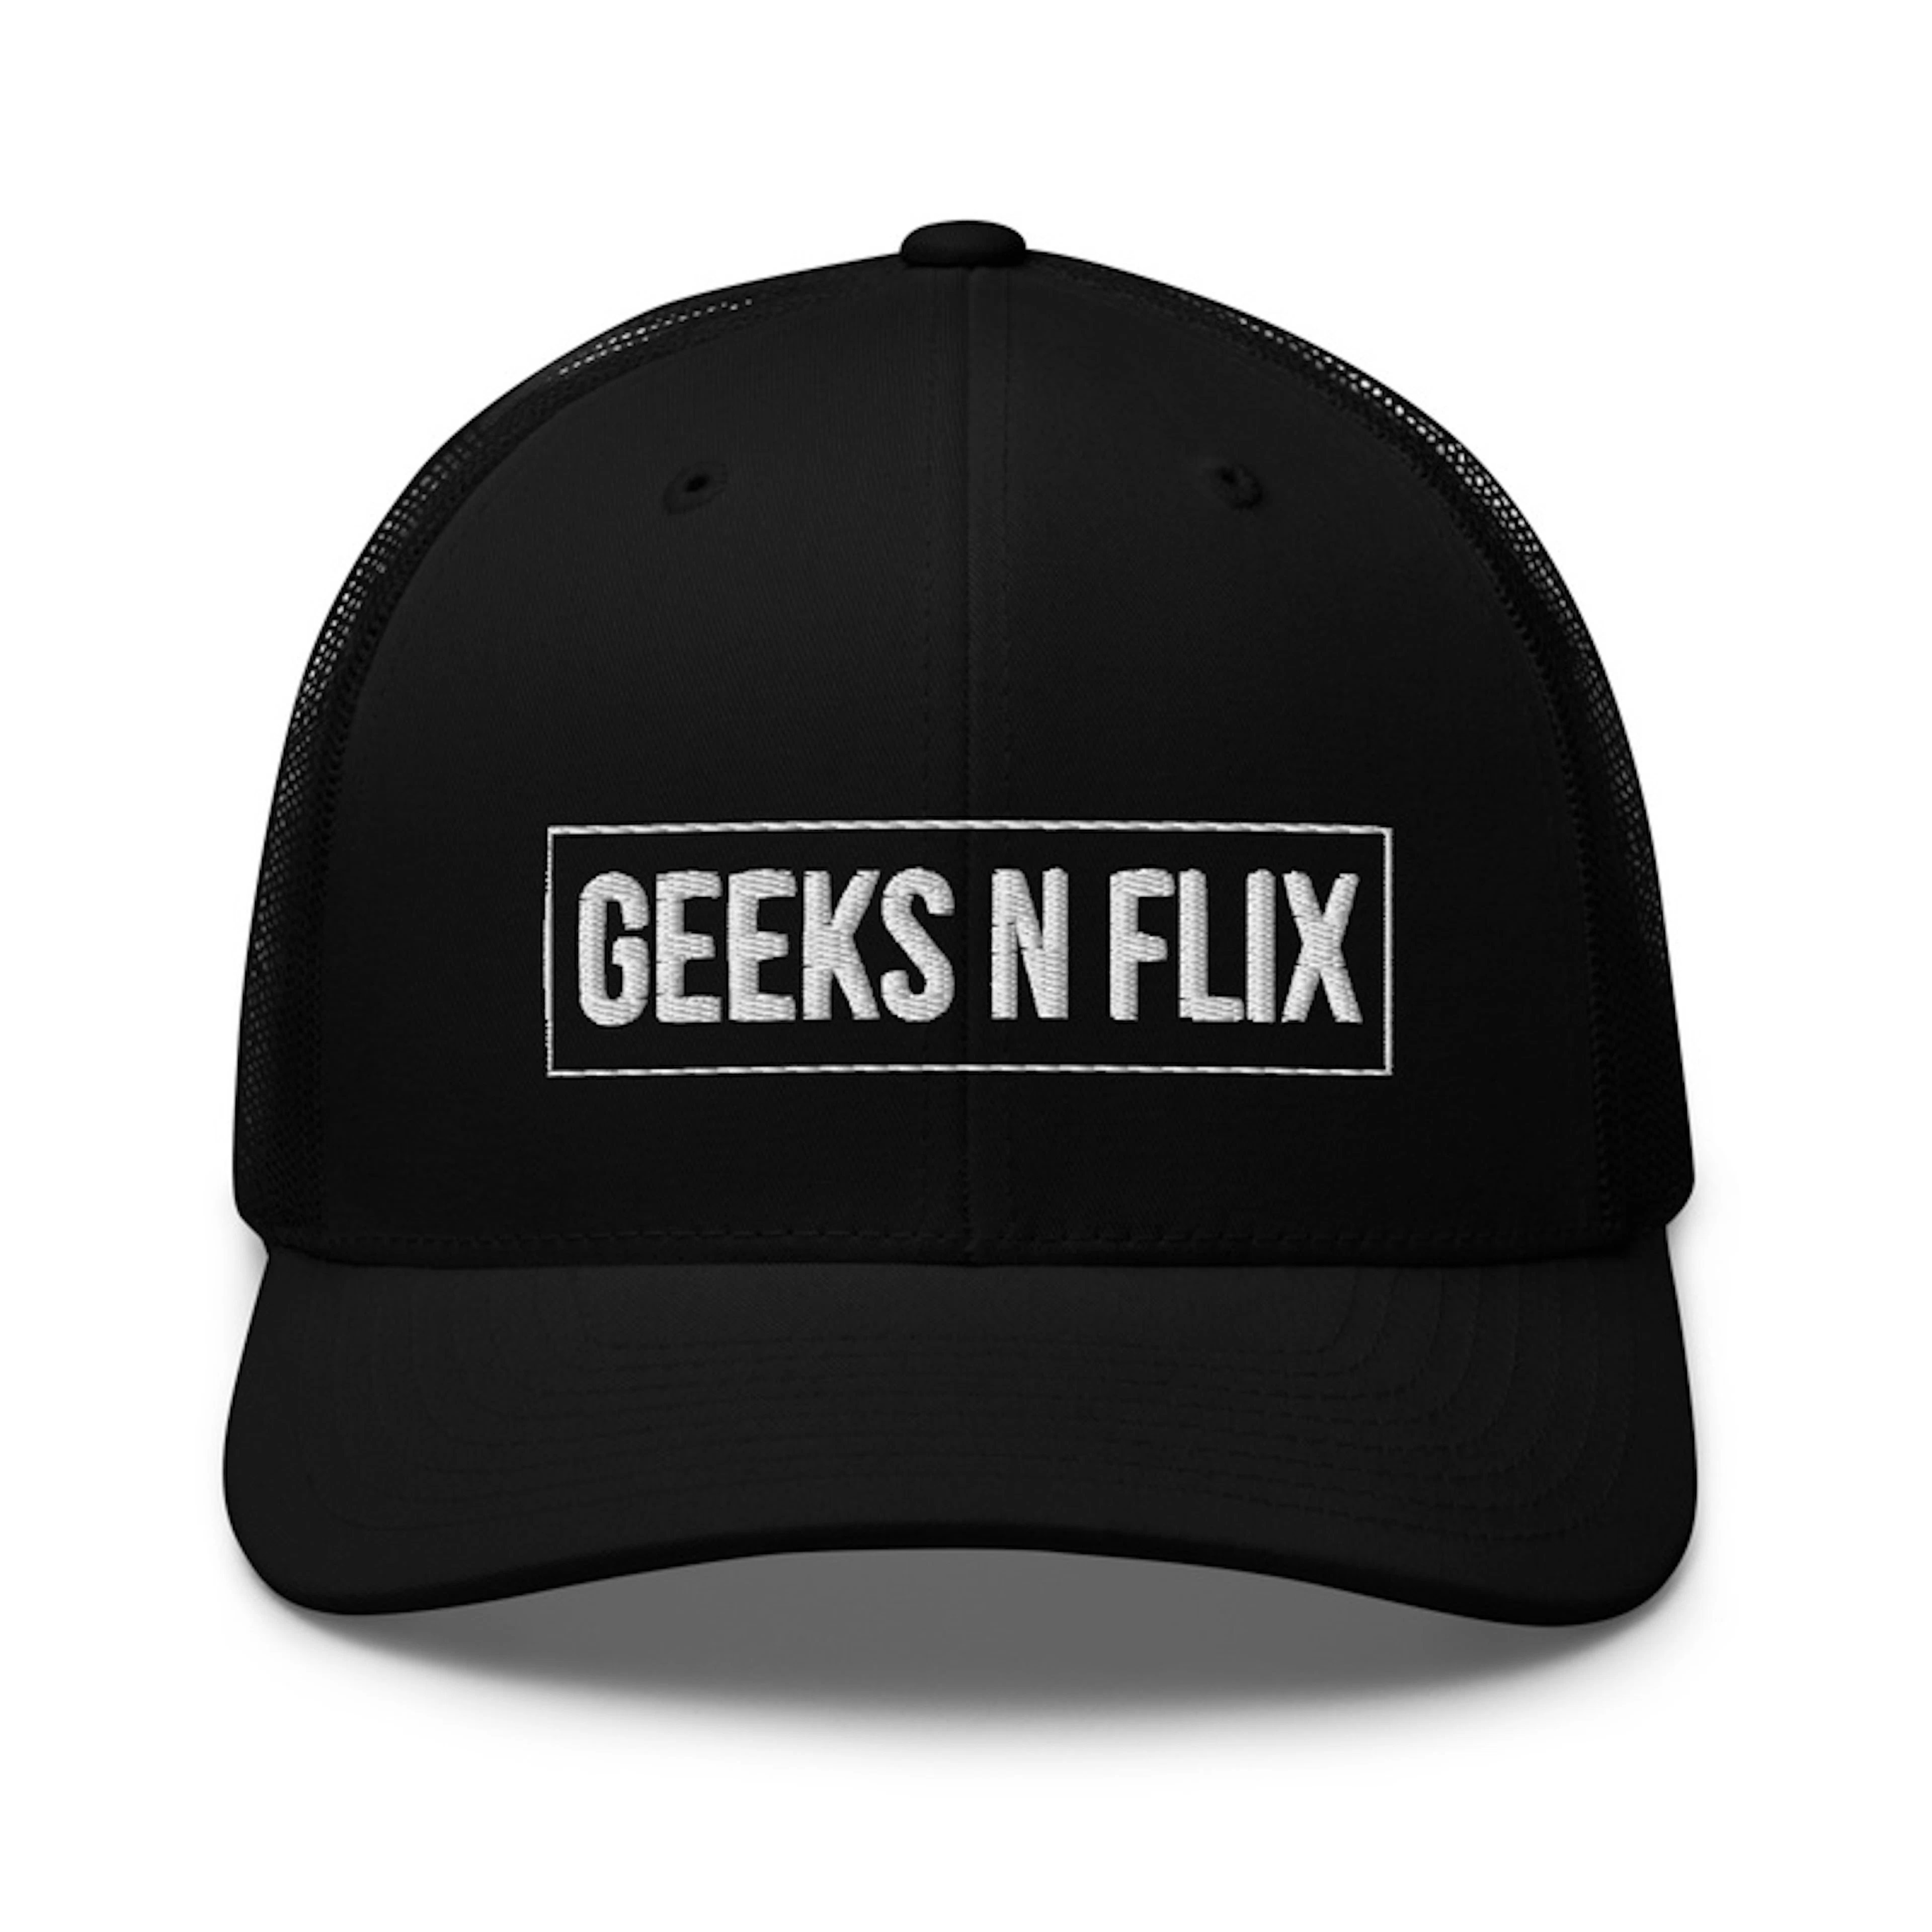 New Geeks and Flix Logo Hat 